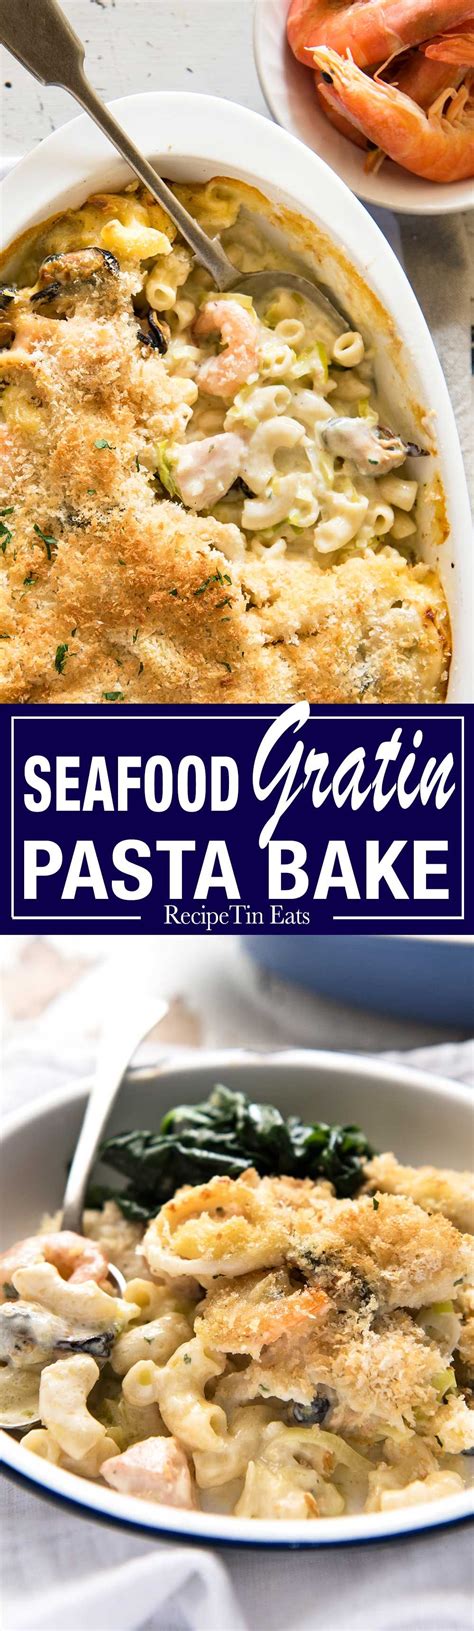 My seafood gratin pasta bake is made with mixed seafood and macaroni, baked with a silky creamy sauce * reduce milking recipe to 1 1/2 cups, add 1/4 cup cream and 1 1/2 cups seafood broth. Seafood Gratin Pasta Bake | Recipe | Baked pasta recipes, Pasta bake, Creamy seafood pasta